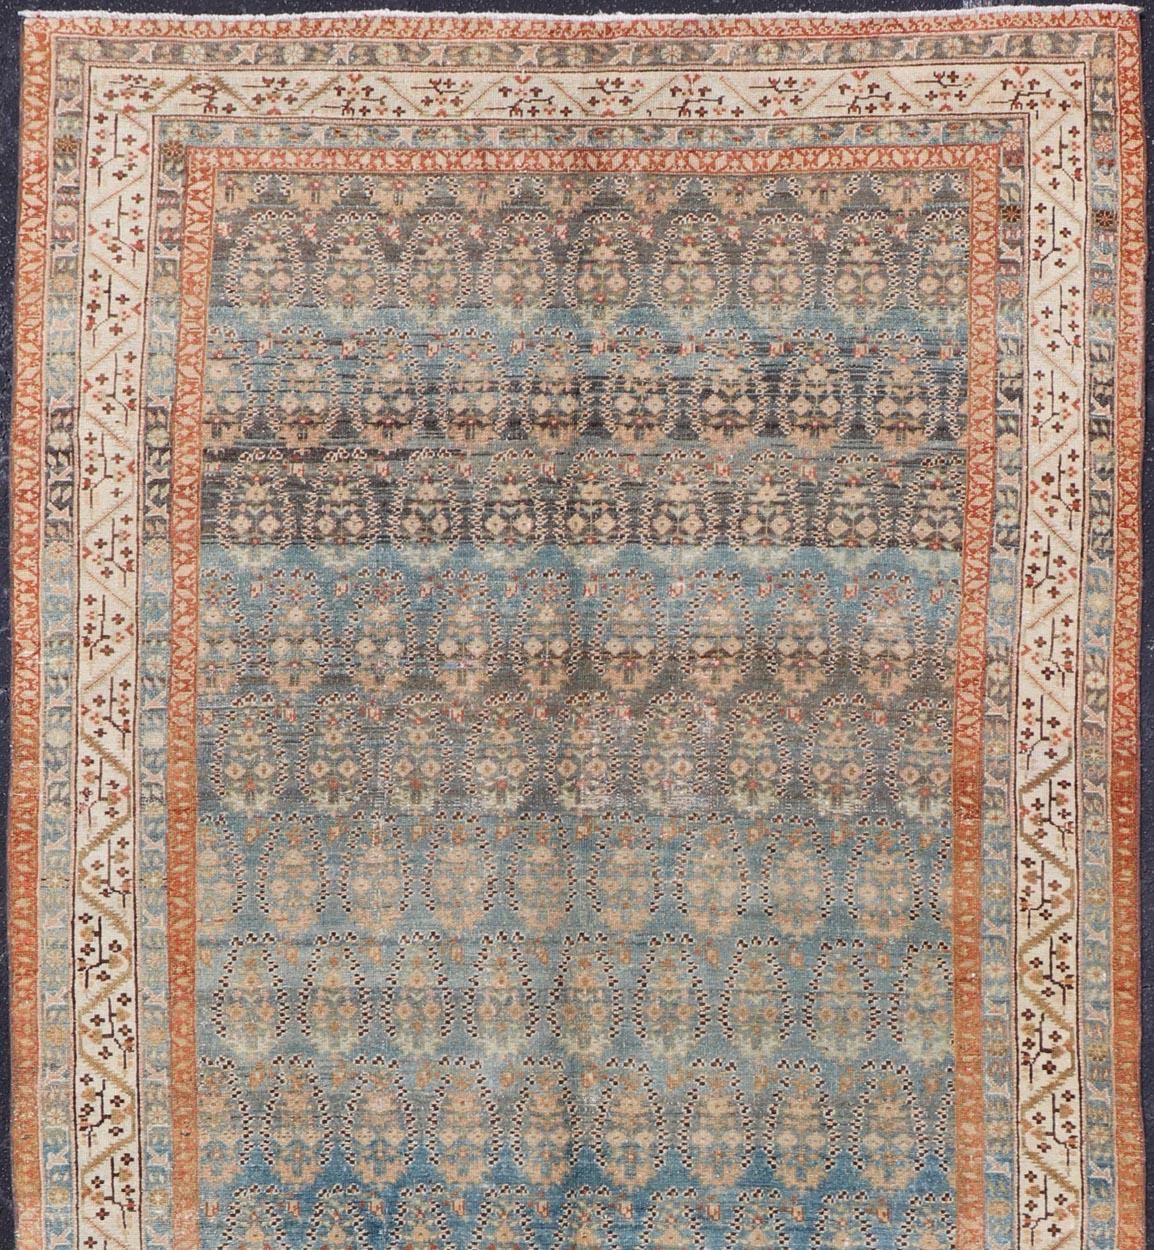 Antique Persian Malayer Gallery rug with Paisley design in light blue background. Persian Antique Malayer Gallery Rug with Floral Geometric Design, rug 19-0206, country of origin / type: Iran / Malayer, circa 1900.
Measures: 6'1 x 14'6
This